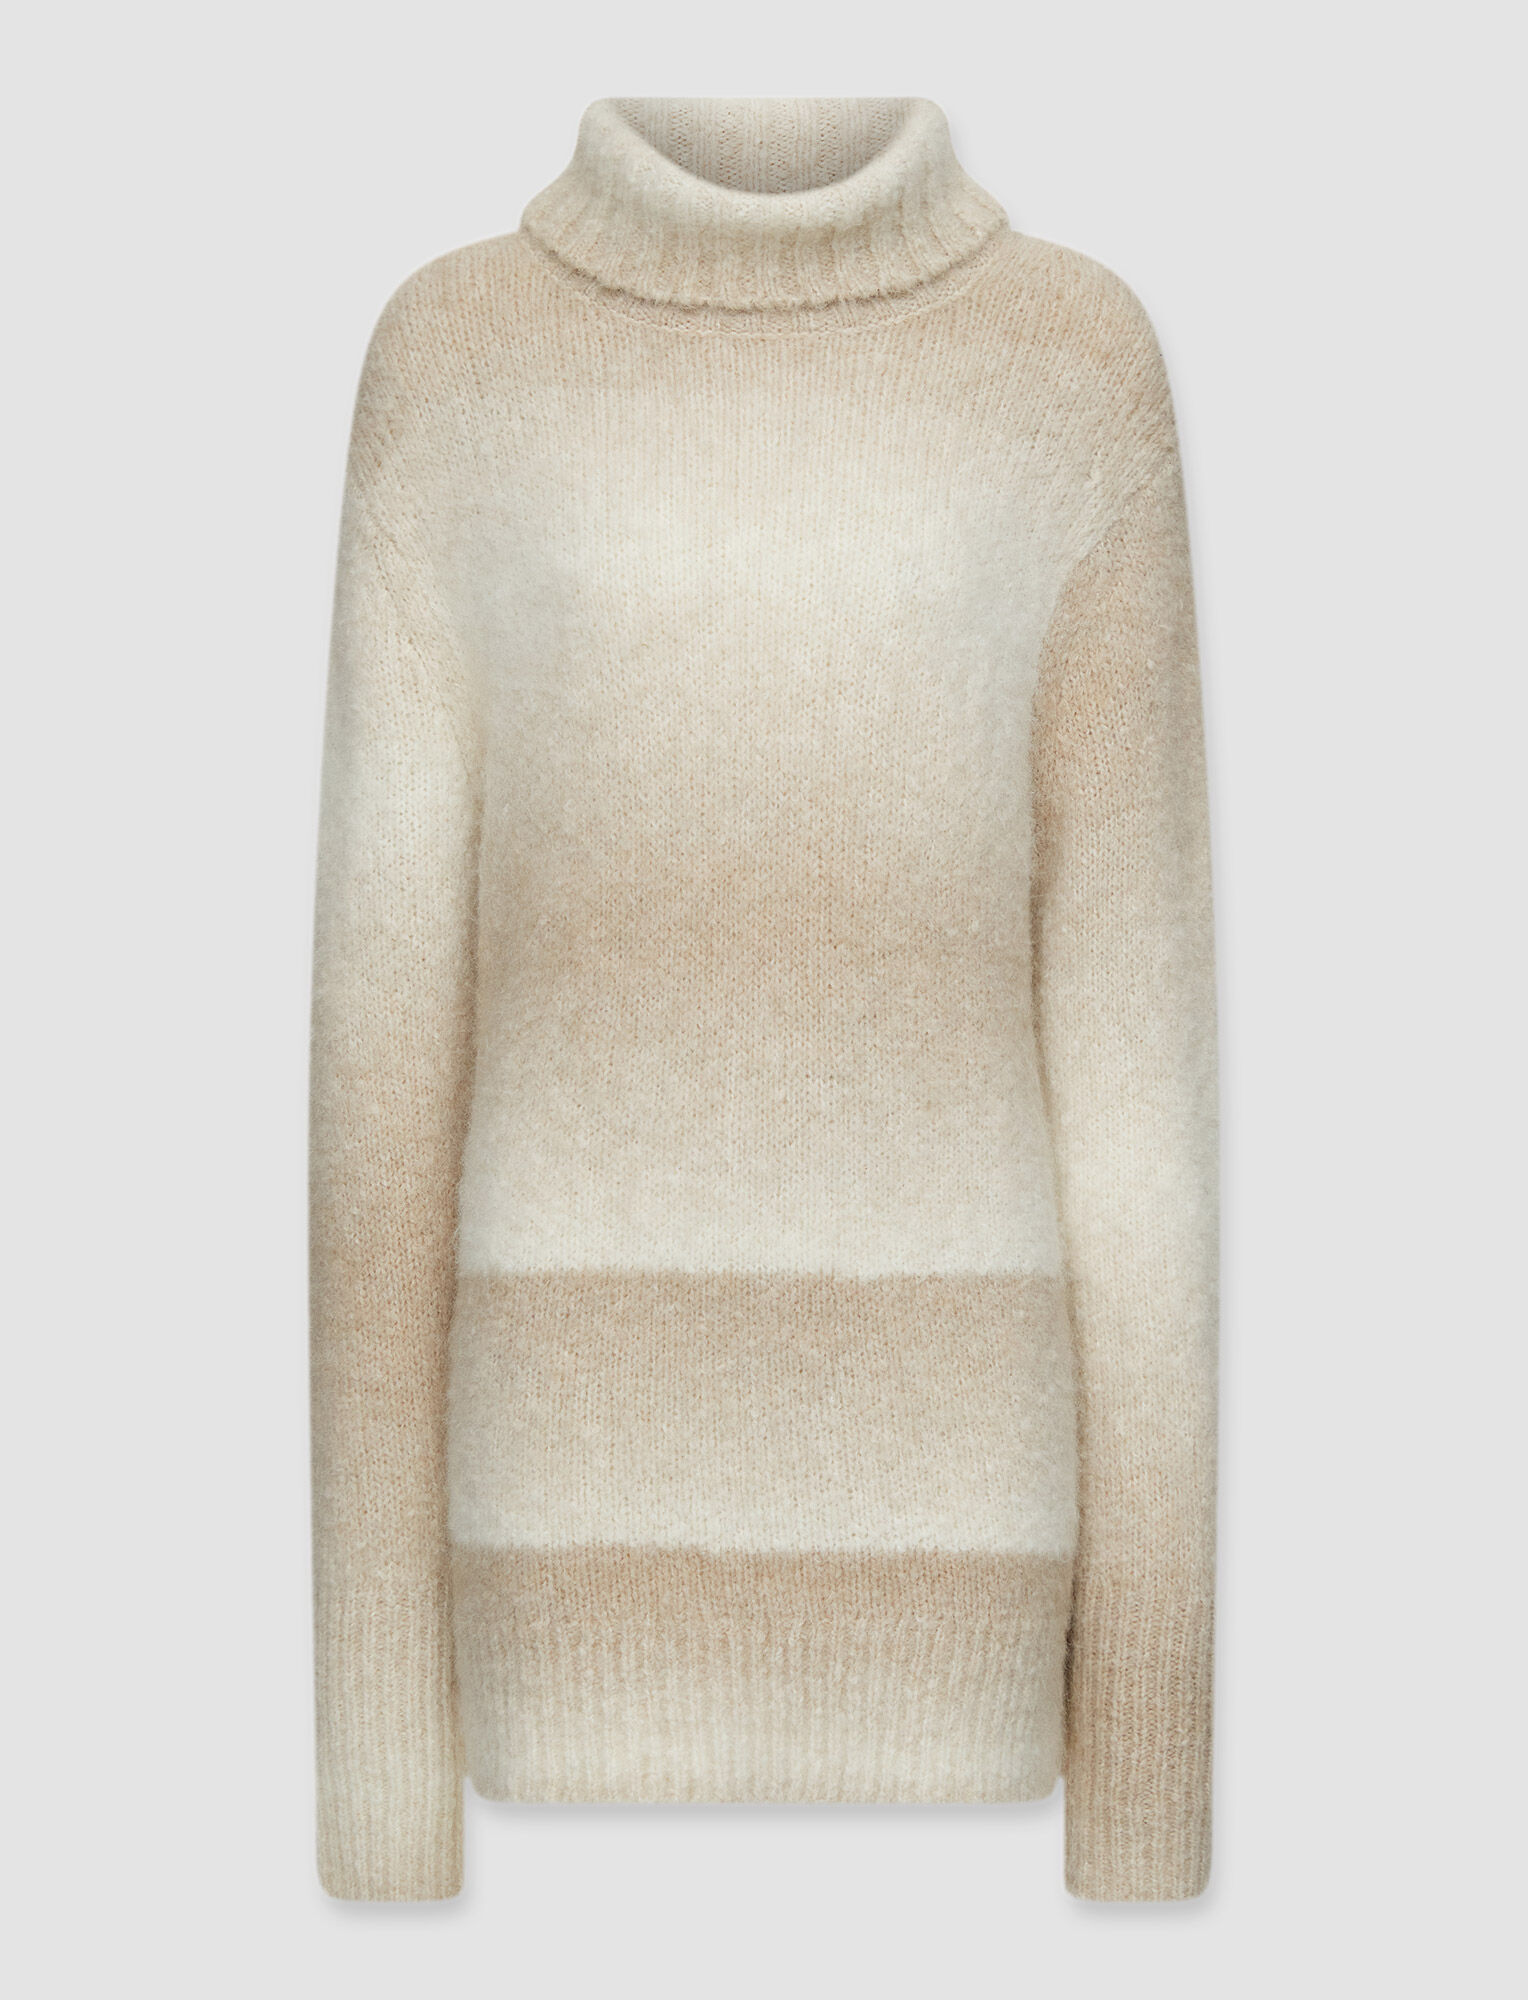 Joseph, Printed Knit High Neck Jumper, in Ivory